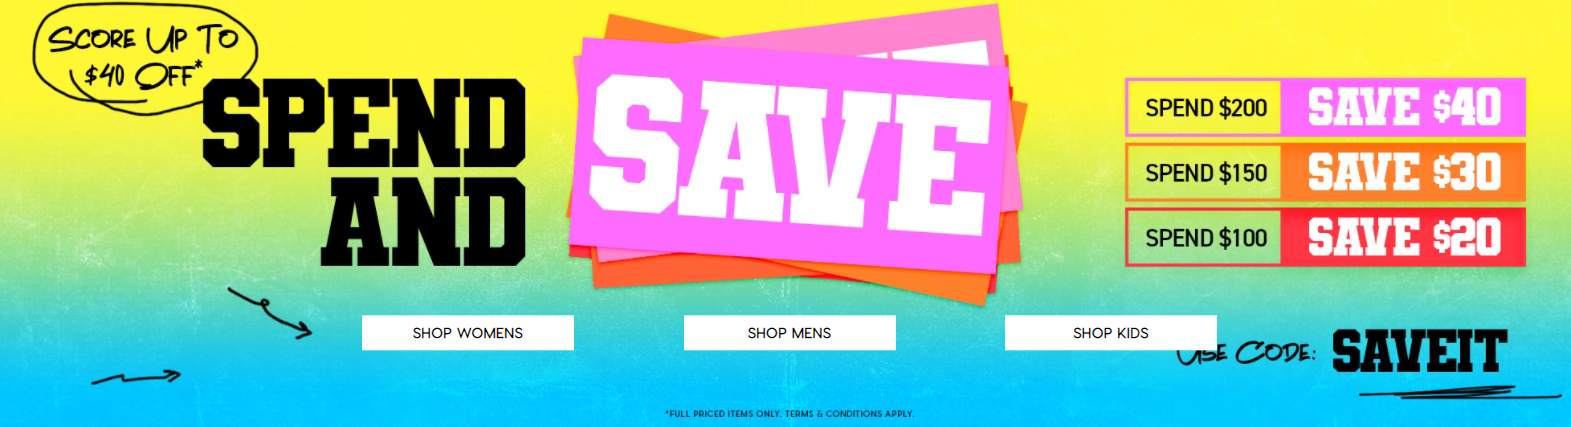 City Beach spend and save up to $40 OFF on full priced items with promo code